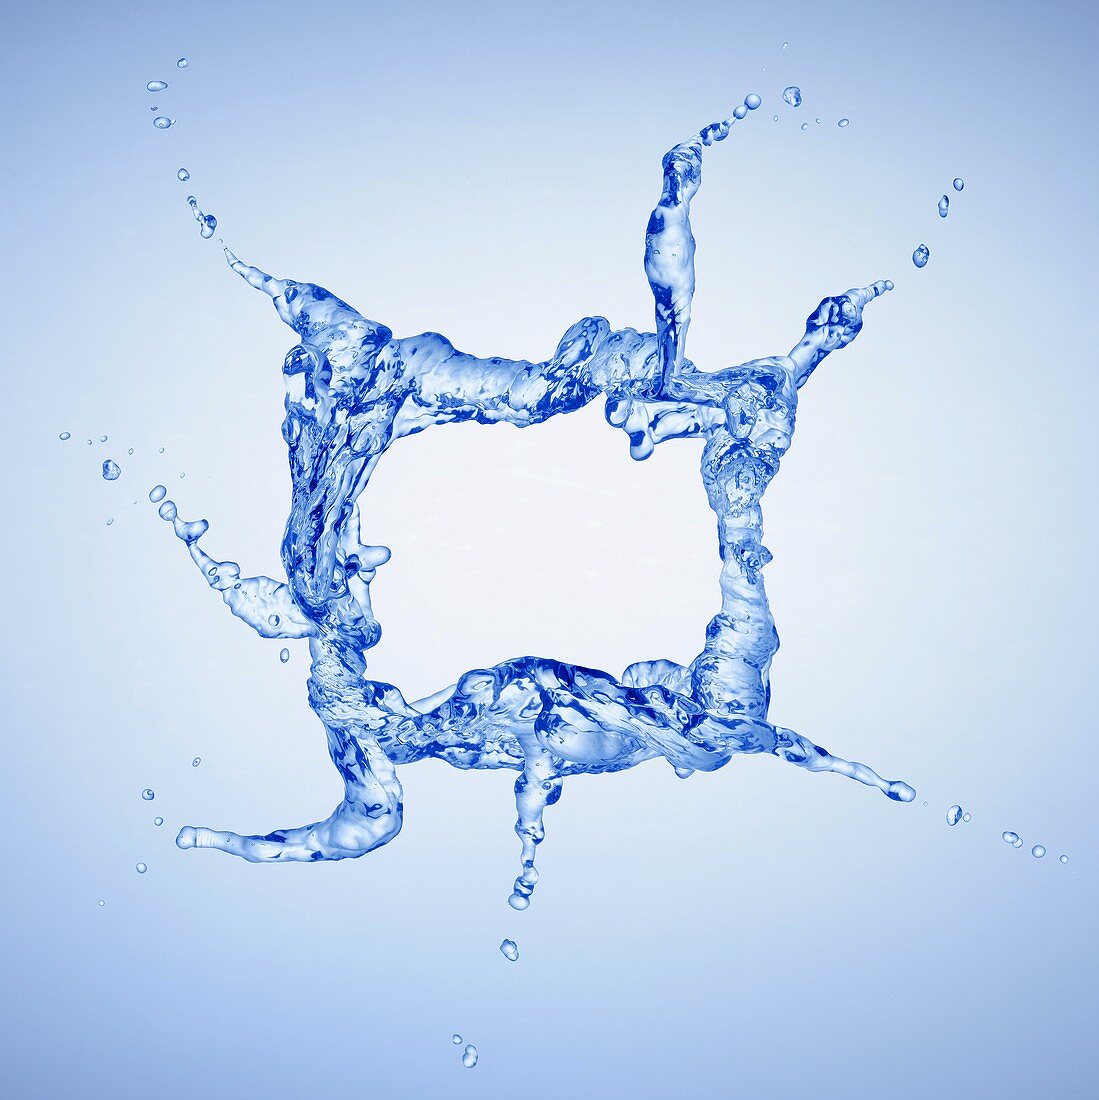 Water forming a frame